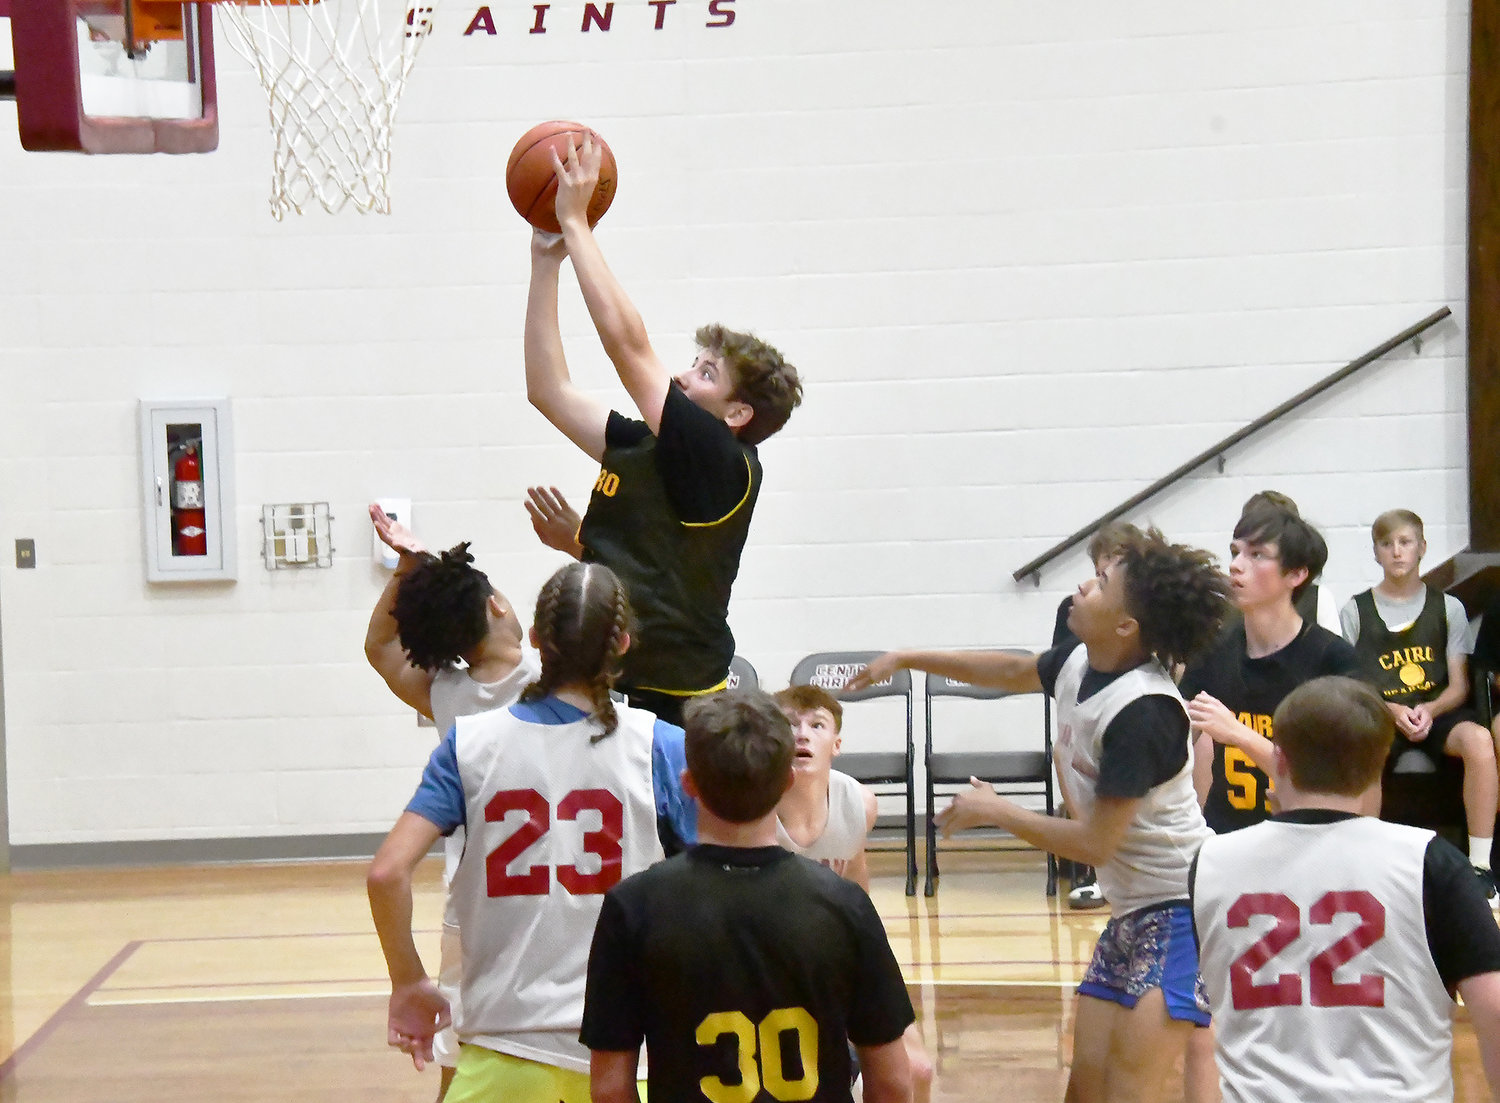 Bryce Chrisman of Cairo drives toward the basket, drawing a foul in the process, during a scrimmage versus Louisiana.